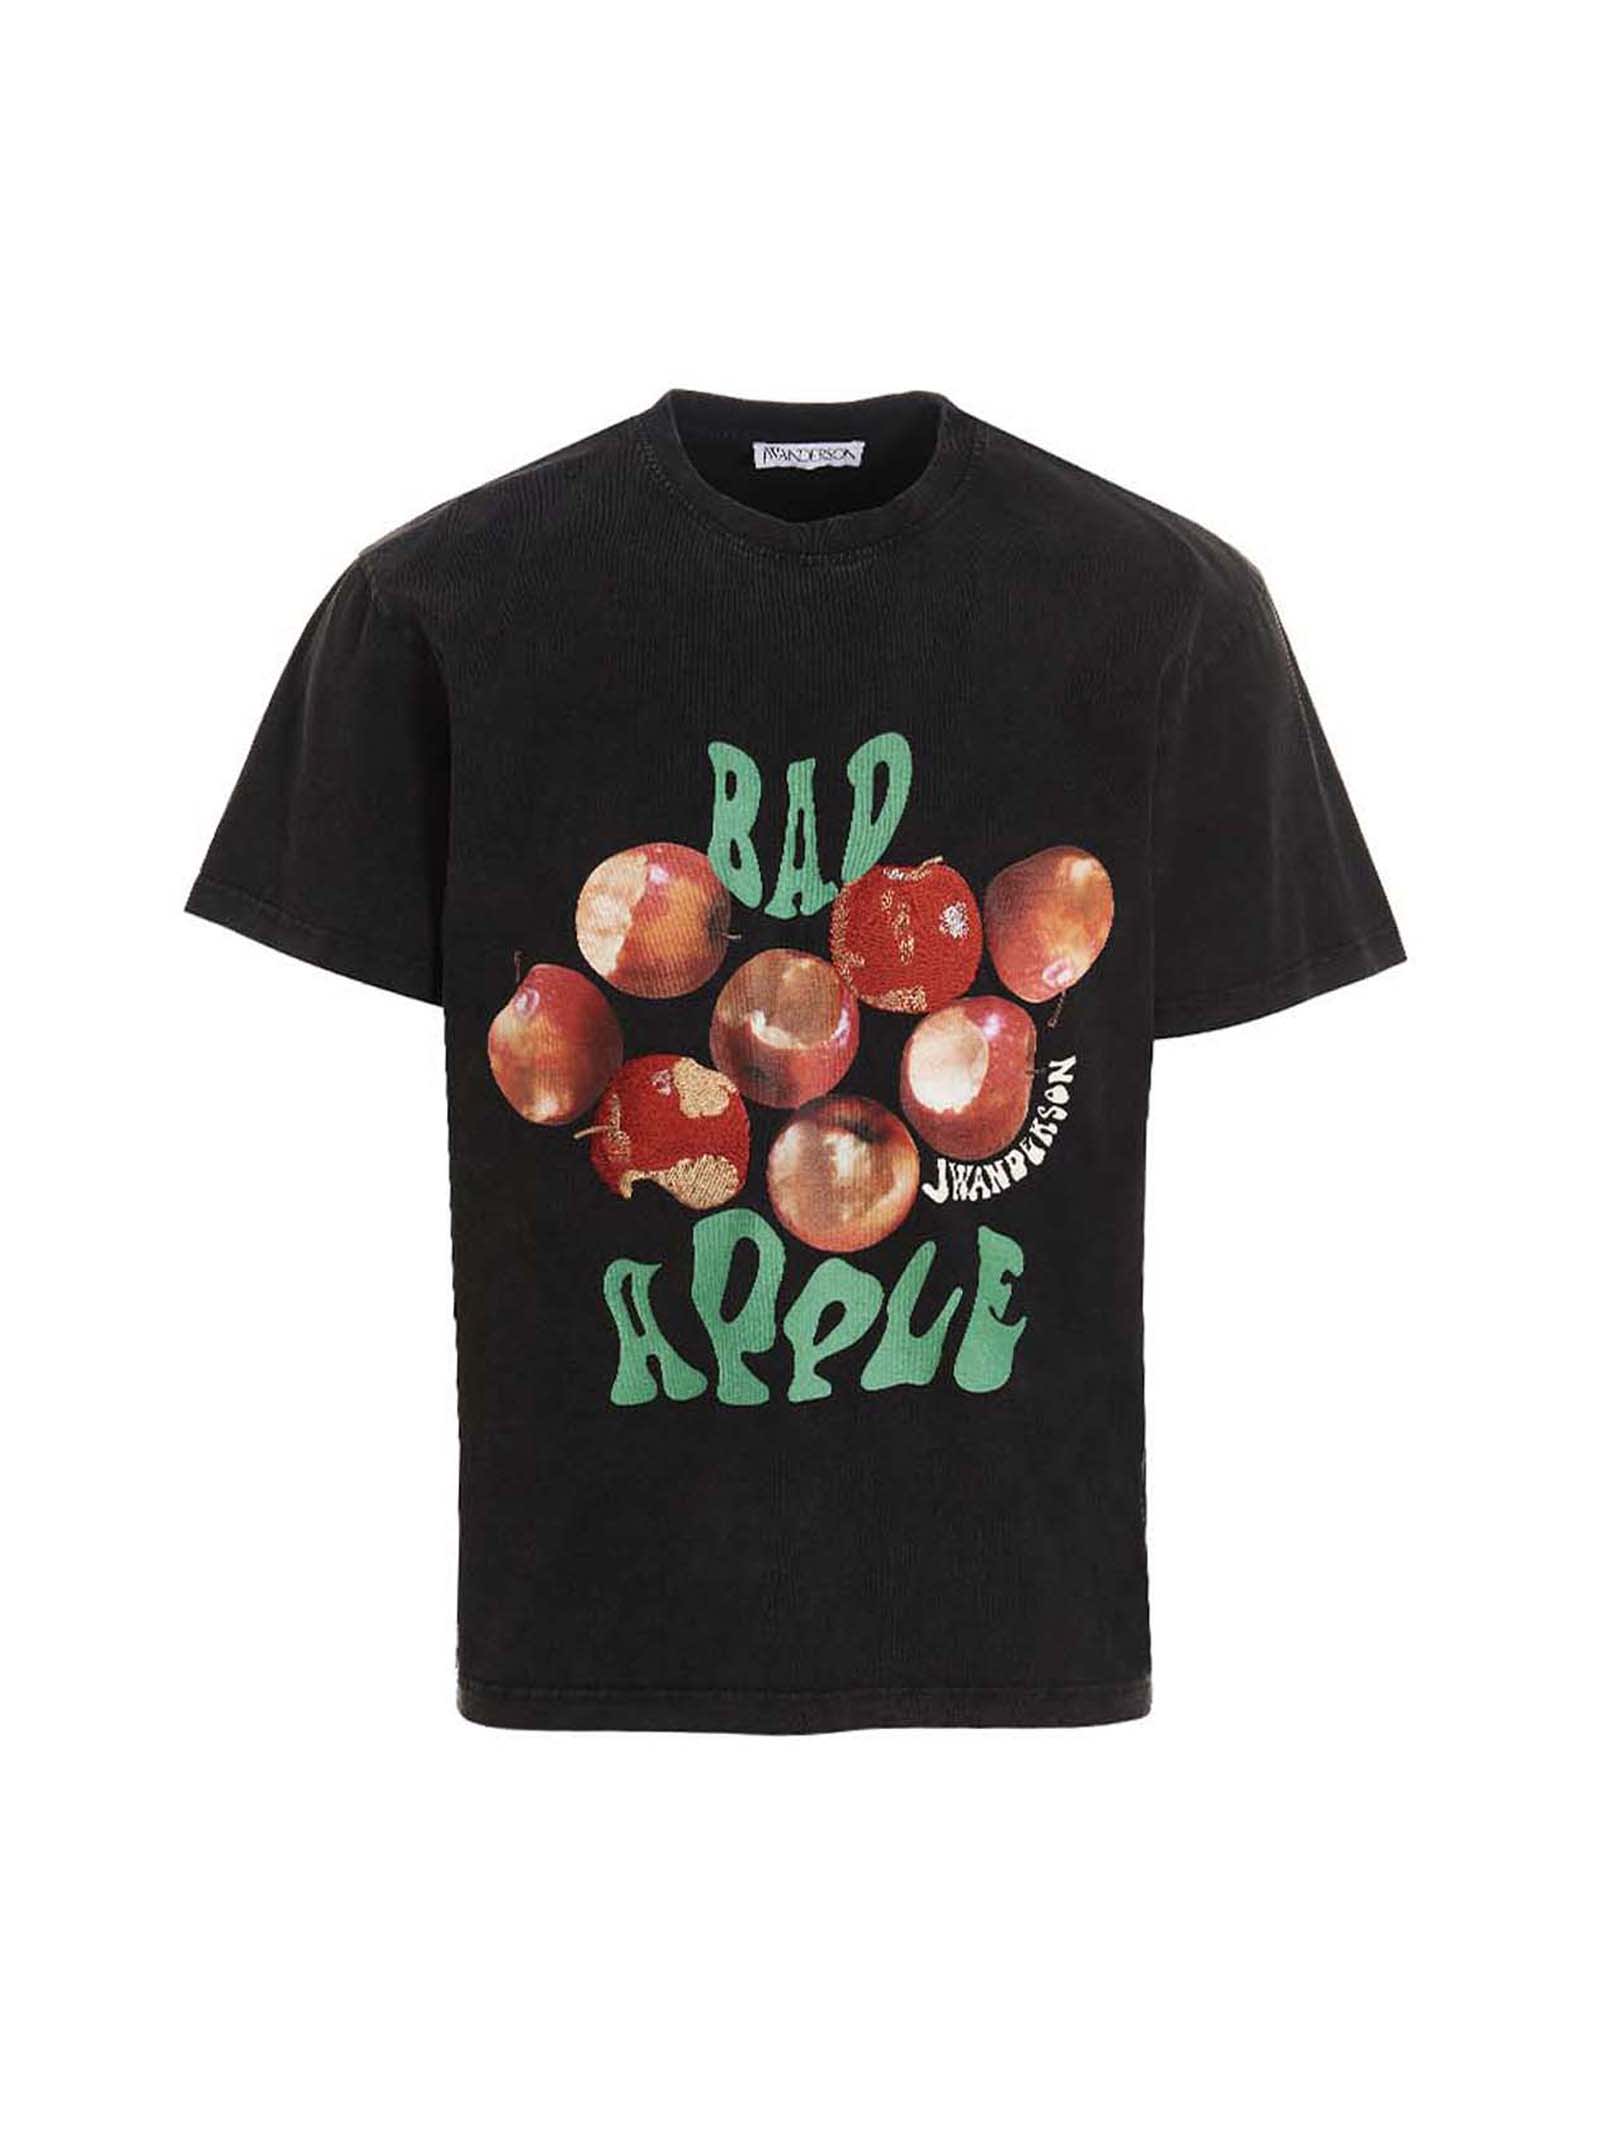 J.W. Anderson the Apple Collection - Bad Apple T-shirt